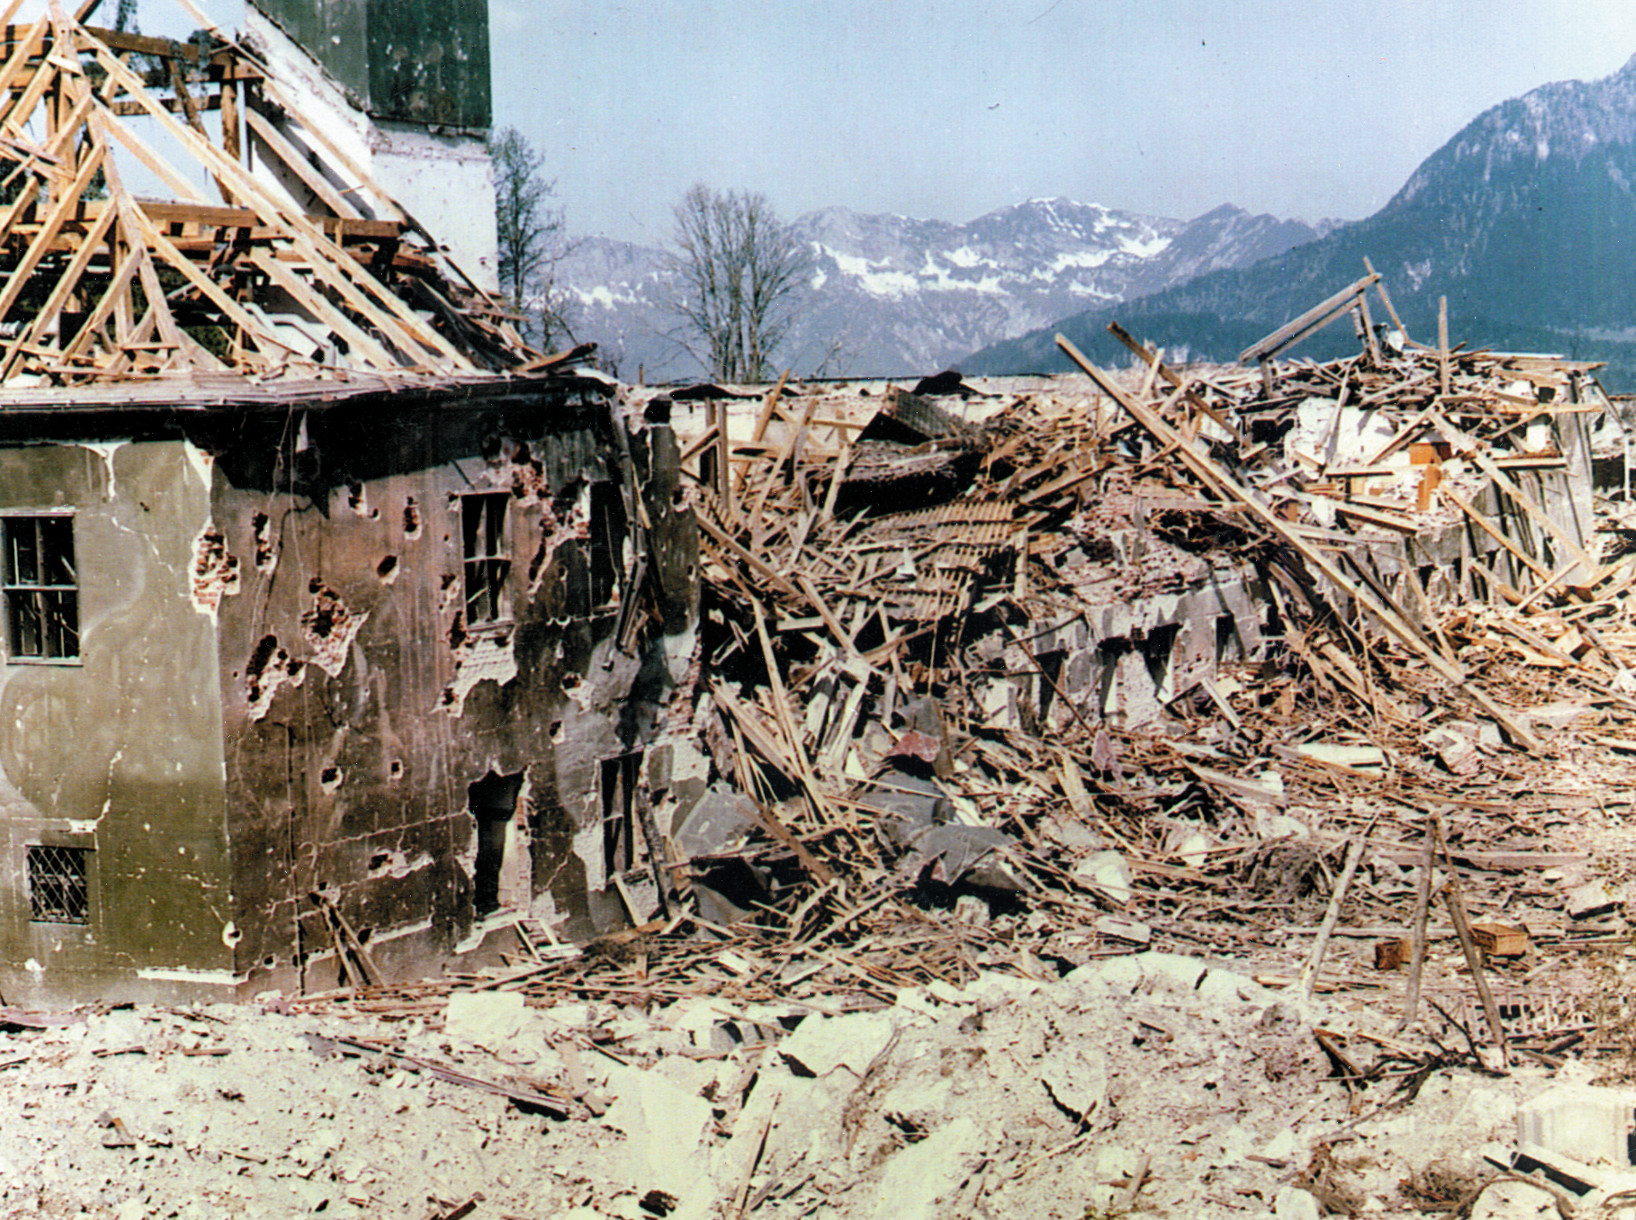 The remains of the Berghof, the house used by guests at Hitler’s residence in the Bavarian Alps, stand as mute testimony to the ferocity of Allied bombing.